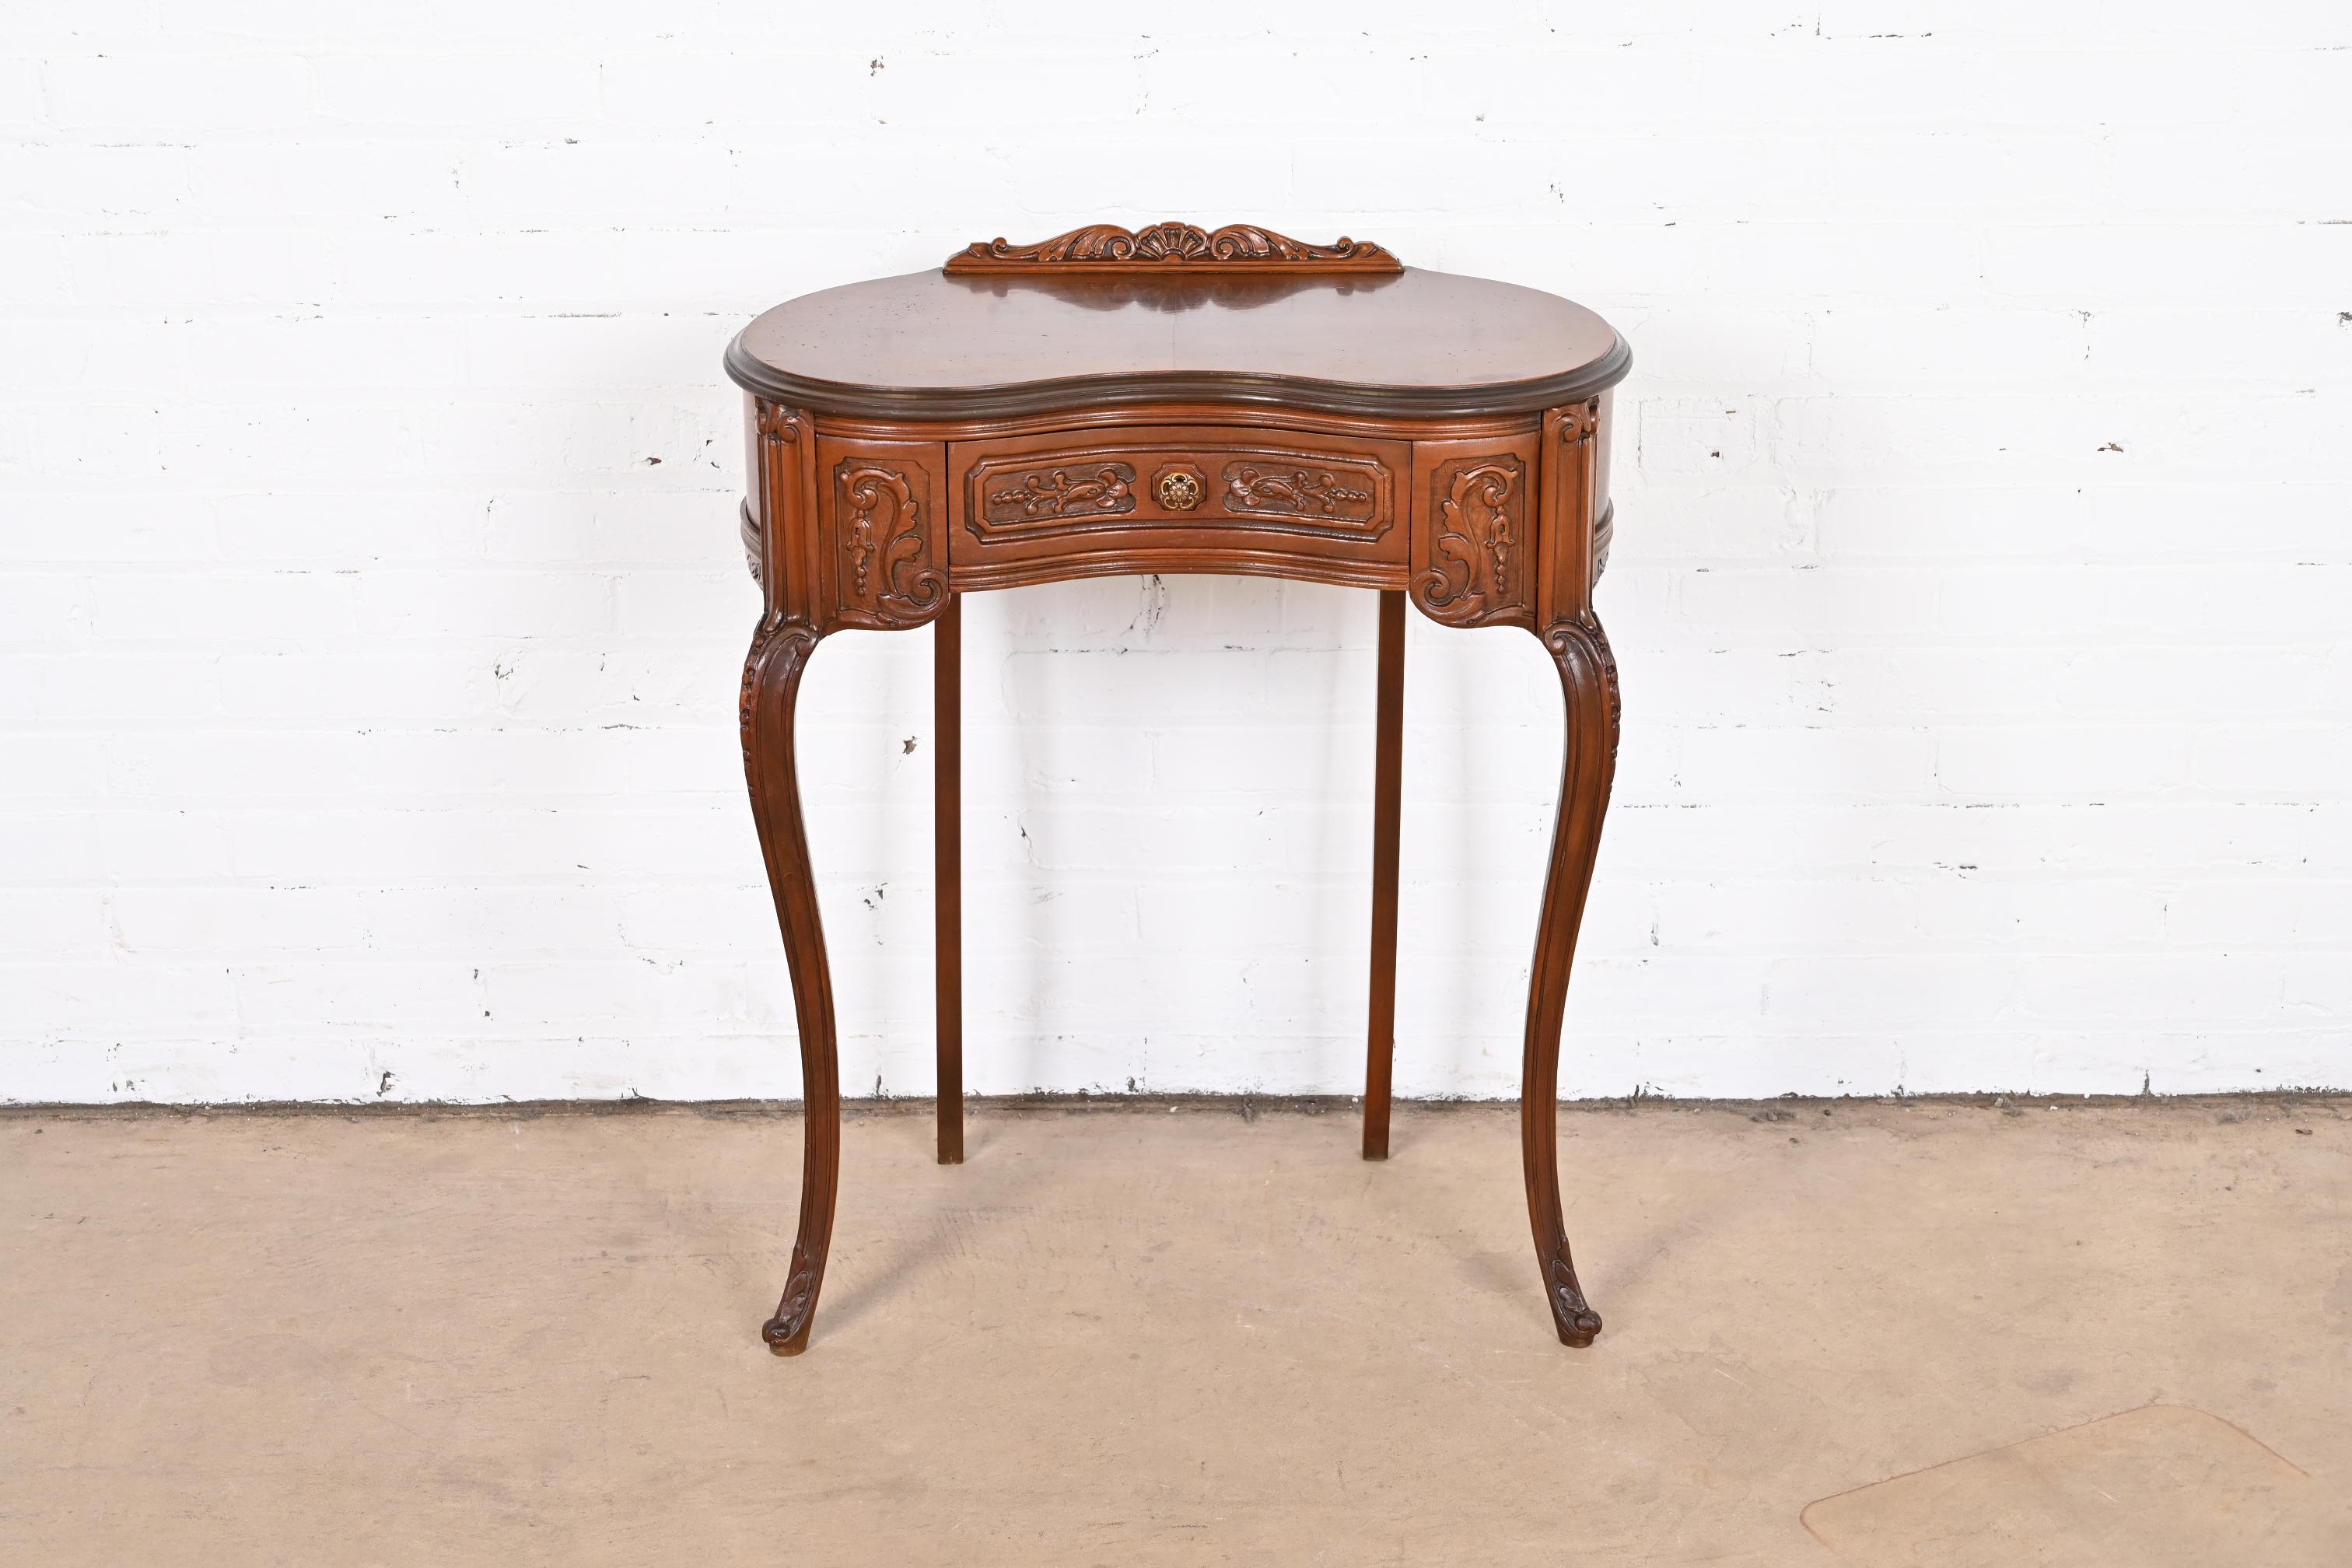 Early 20th Century French Louis XV Walnut Kidney Shaped Vanity or Ladies Writing Desk With Chair